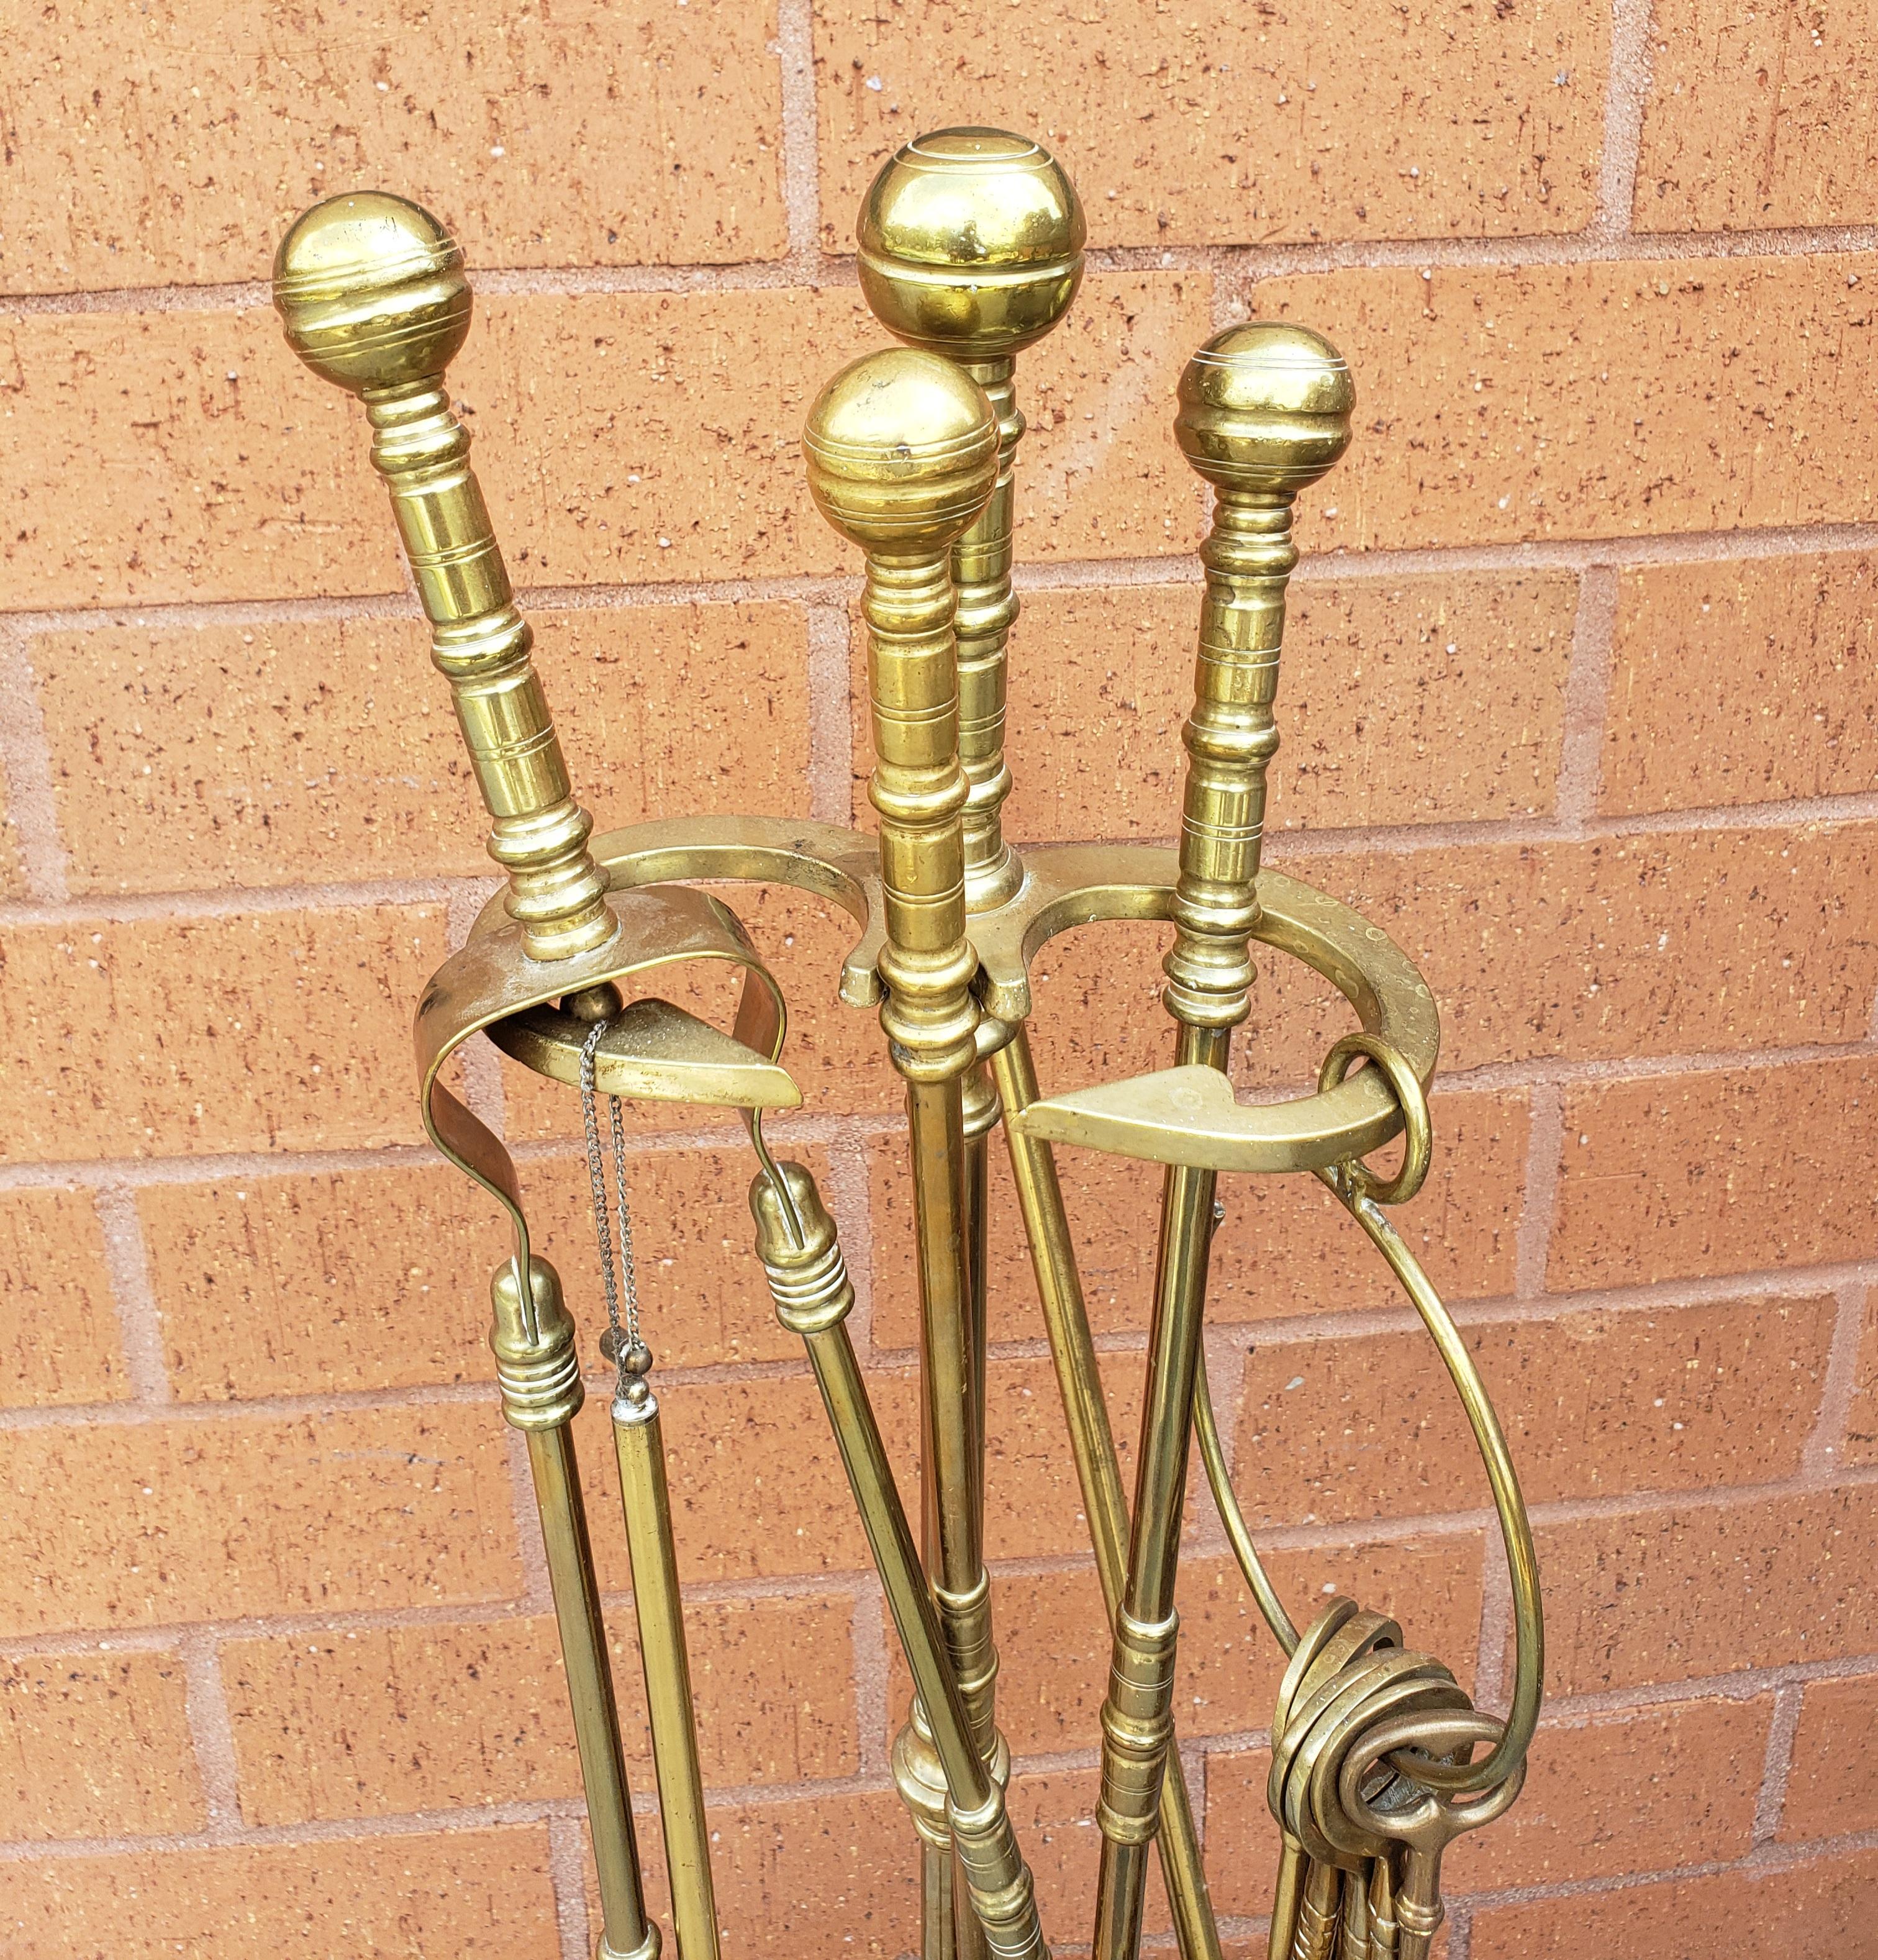 An Early 20th Century Gorgeous 7 piece George III style Canon Ball pure cast brass fireplace tool set in great vintage condition with a bonus antique  large skeleton key set of 5 Assorted Antique Polished Solid Brass Skeleton Keys on Large Jailers